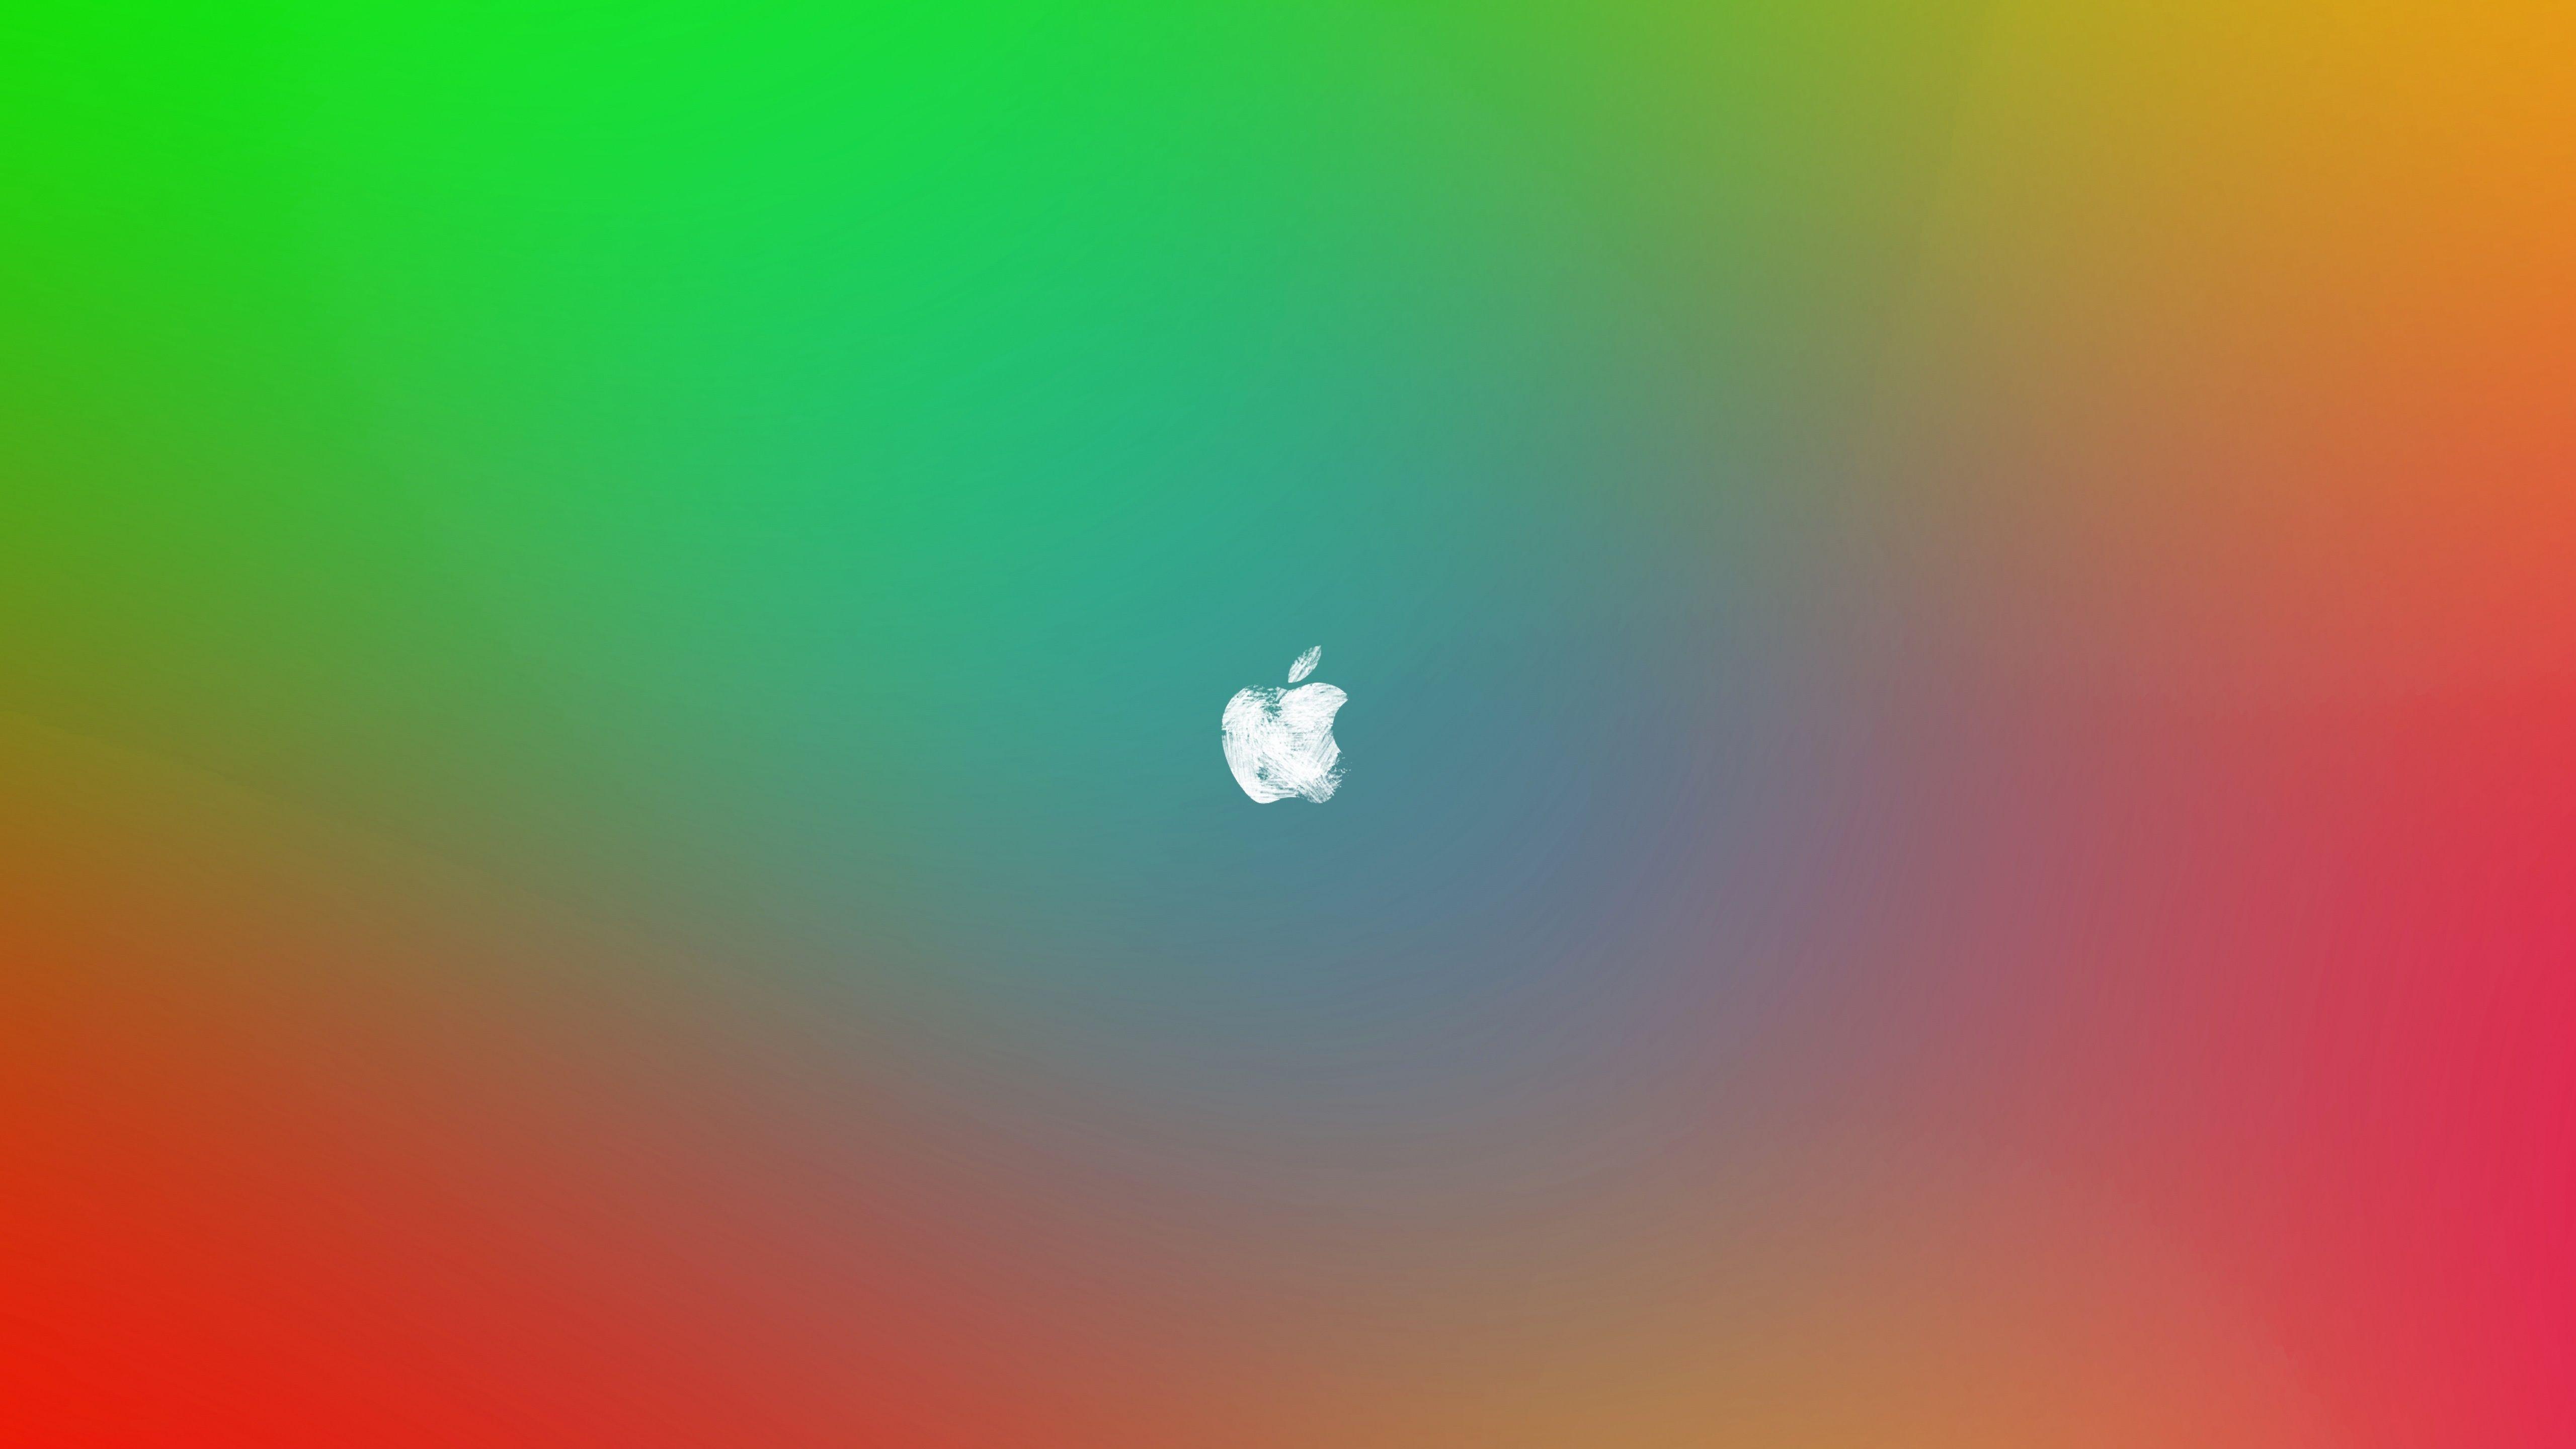 Wallpaper Apple logo, Colorful, HD, 5K, Minimal,. Wallpaper for iPhone, Android, Mobile and Desktop